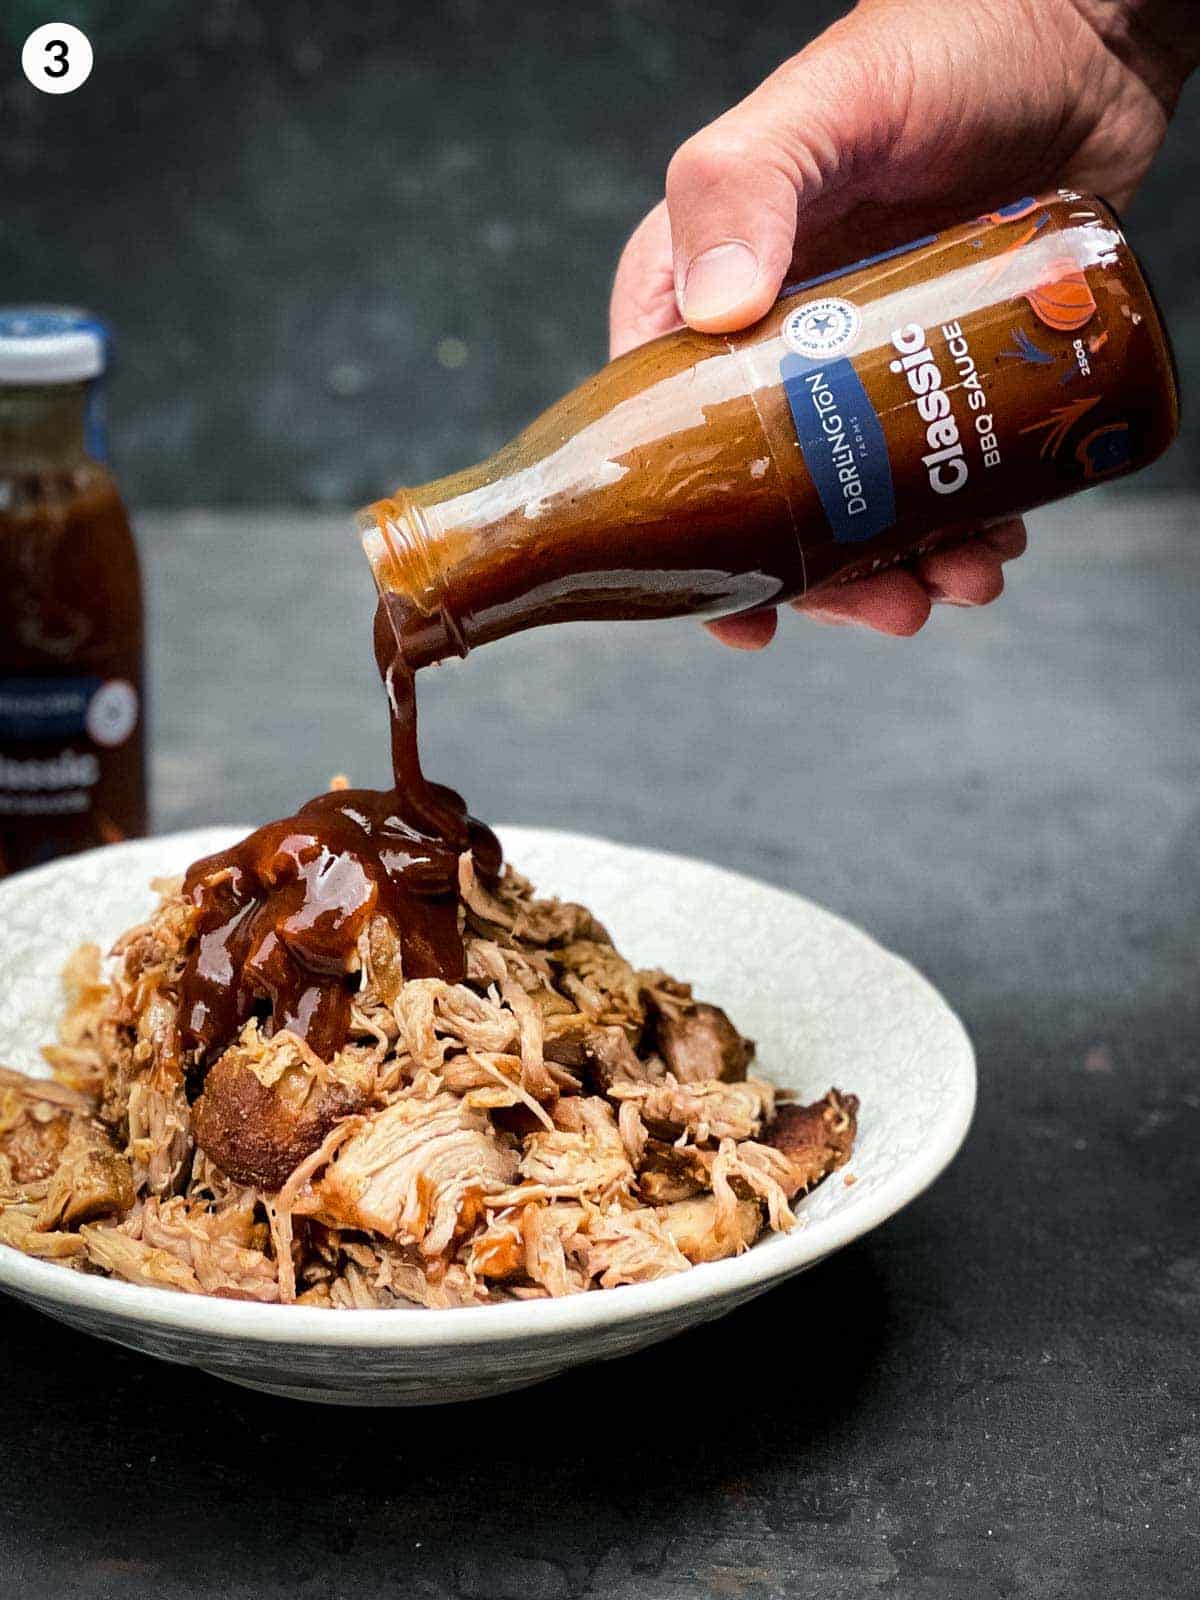 Hand pouring BBQ sauce over pulled pork